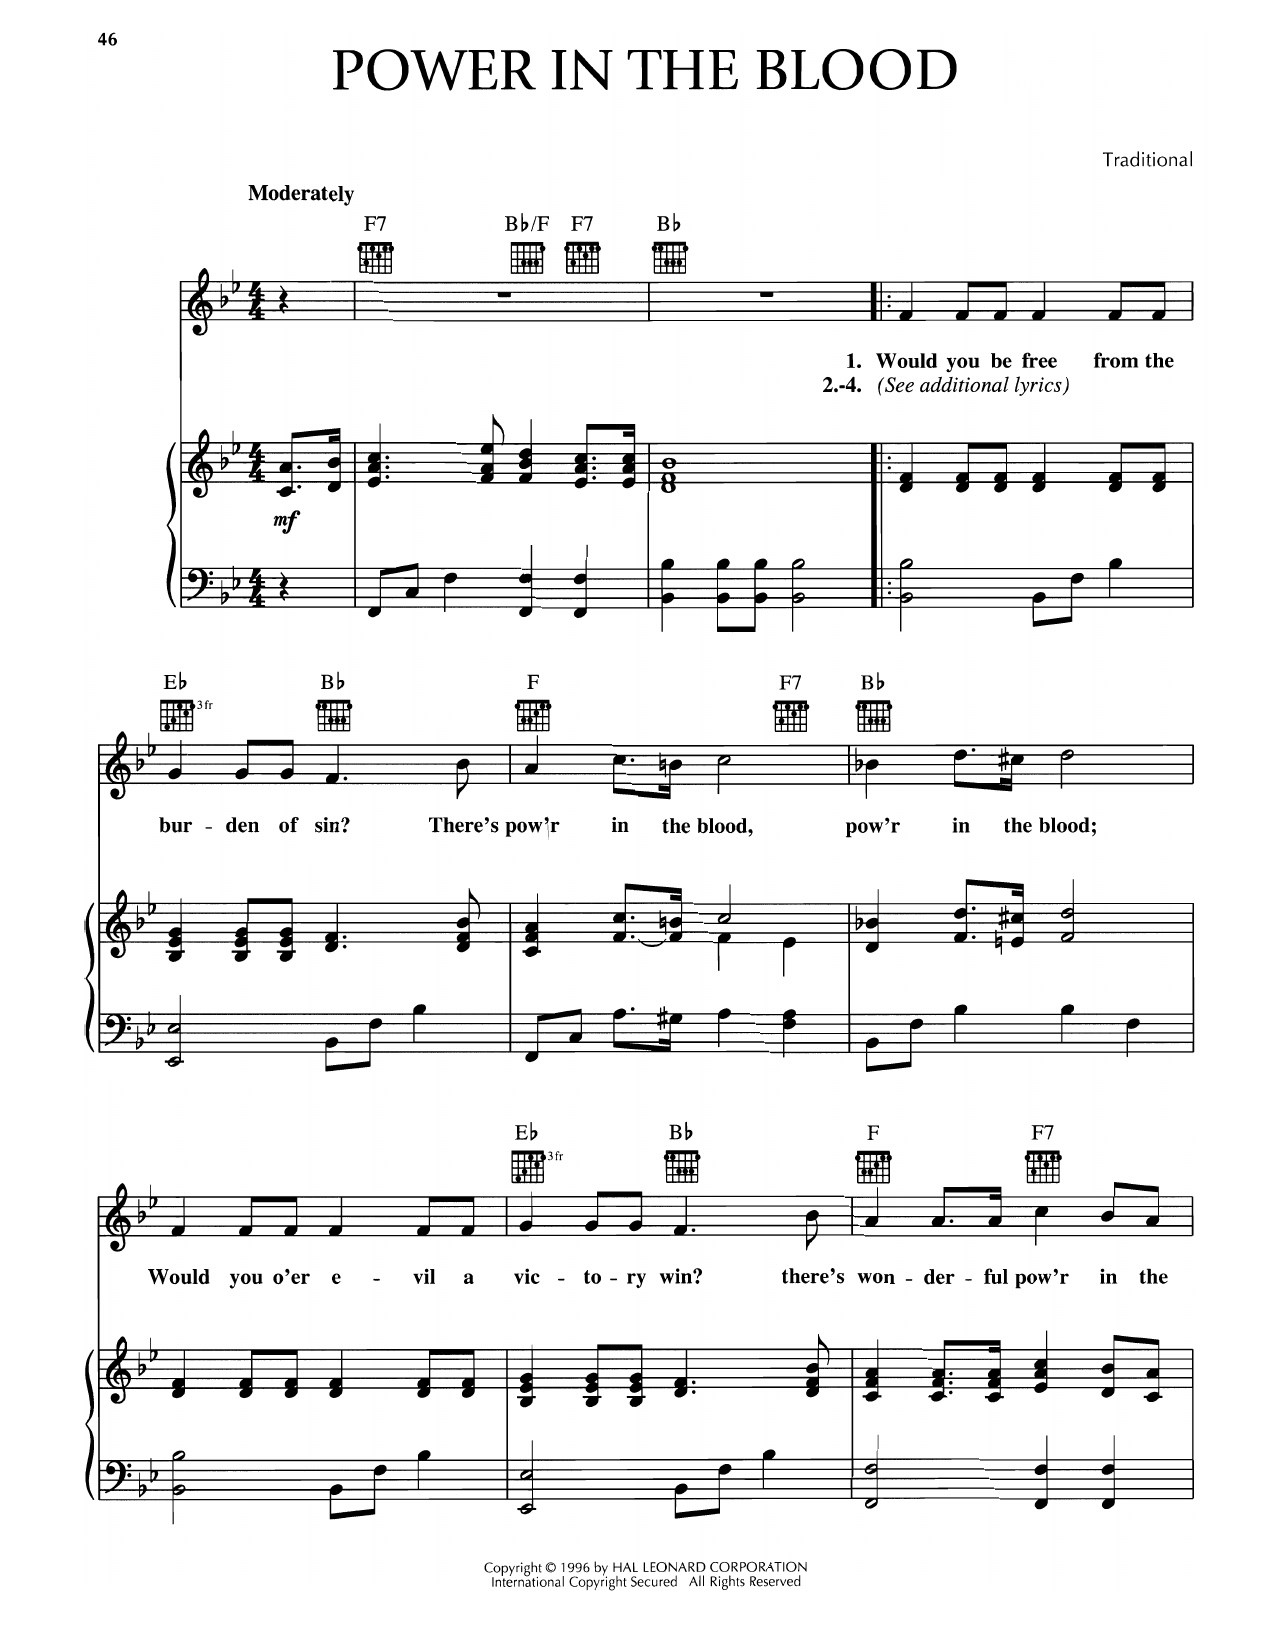 Download Traditional Power In The Blood Sheet Music